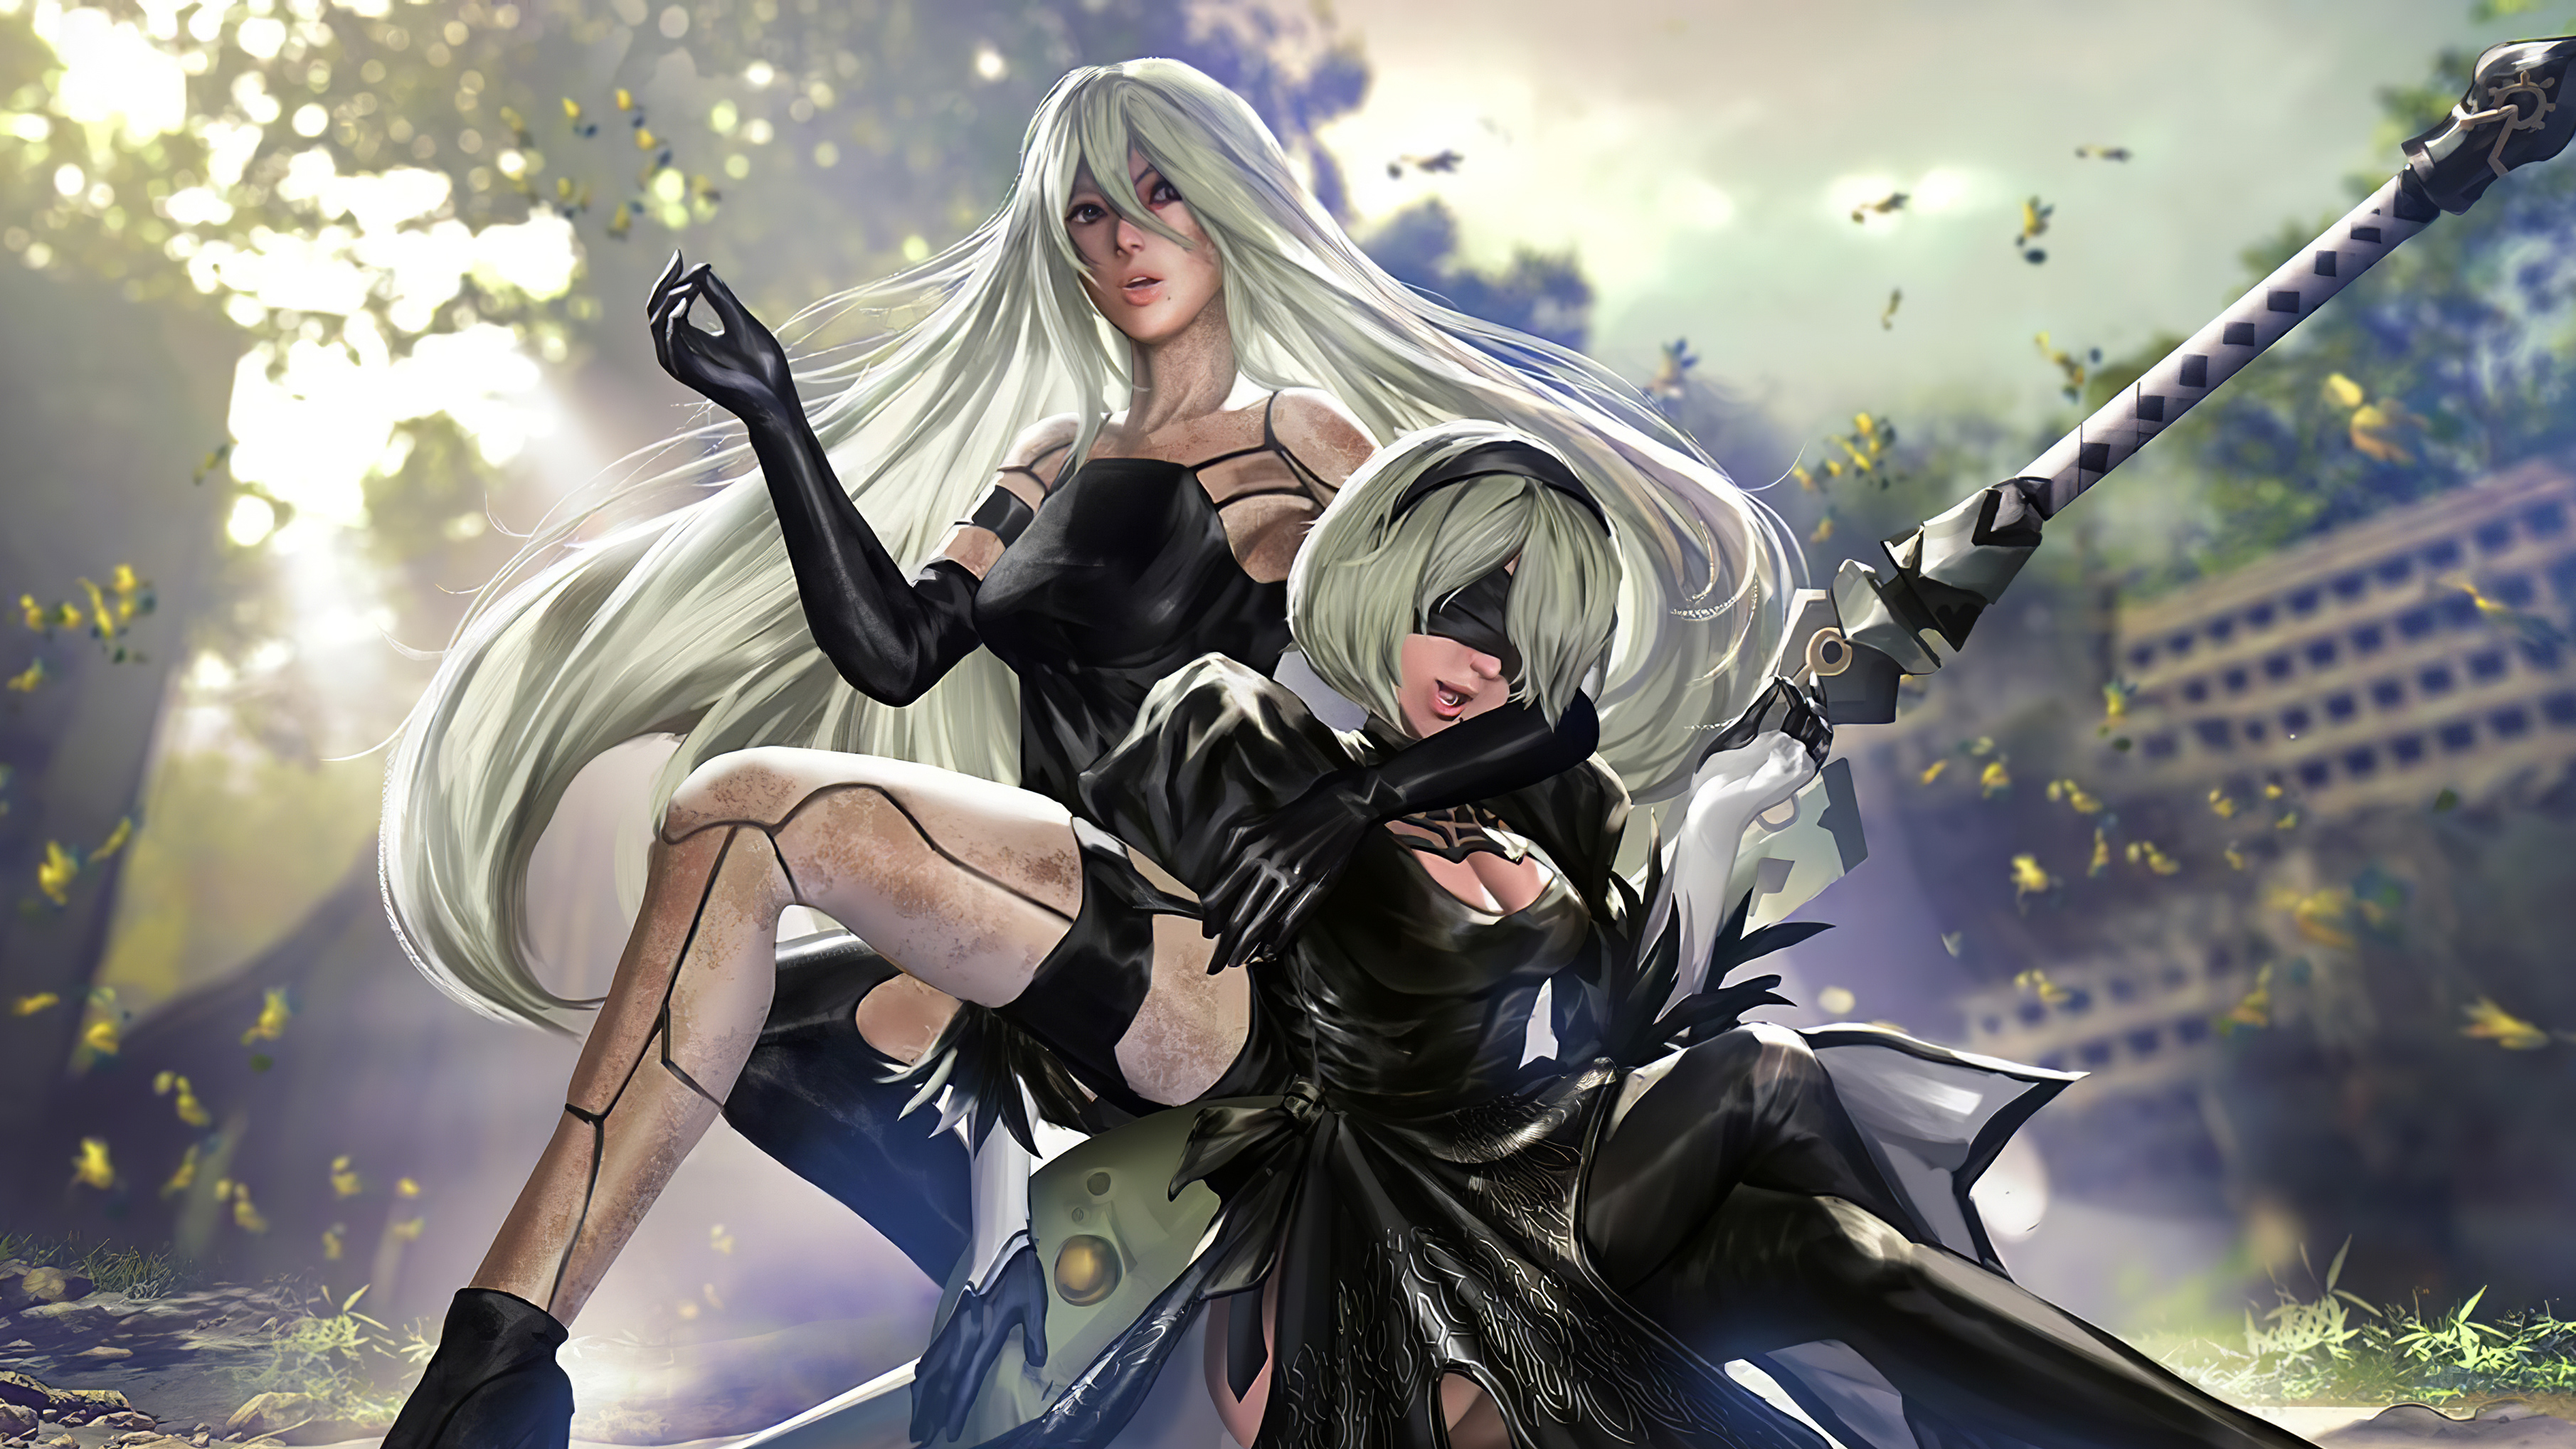 Download wallpaper 840x1336 white hair, a2, nier: automata, warrior, video  game, iphone 5, iphone 5s, iphone 5c, ipod touch, 840x1336 hd background,  8348